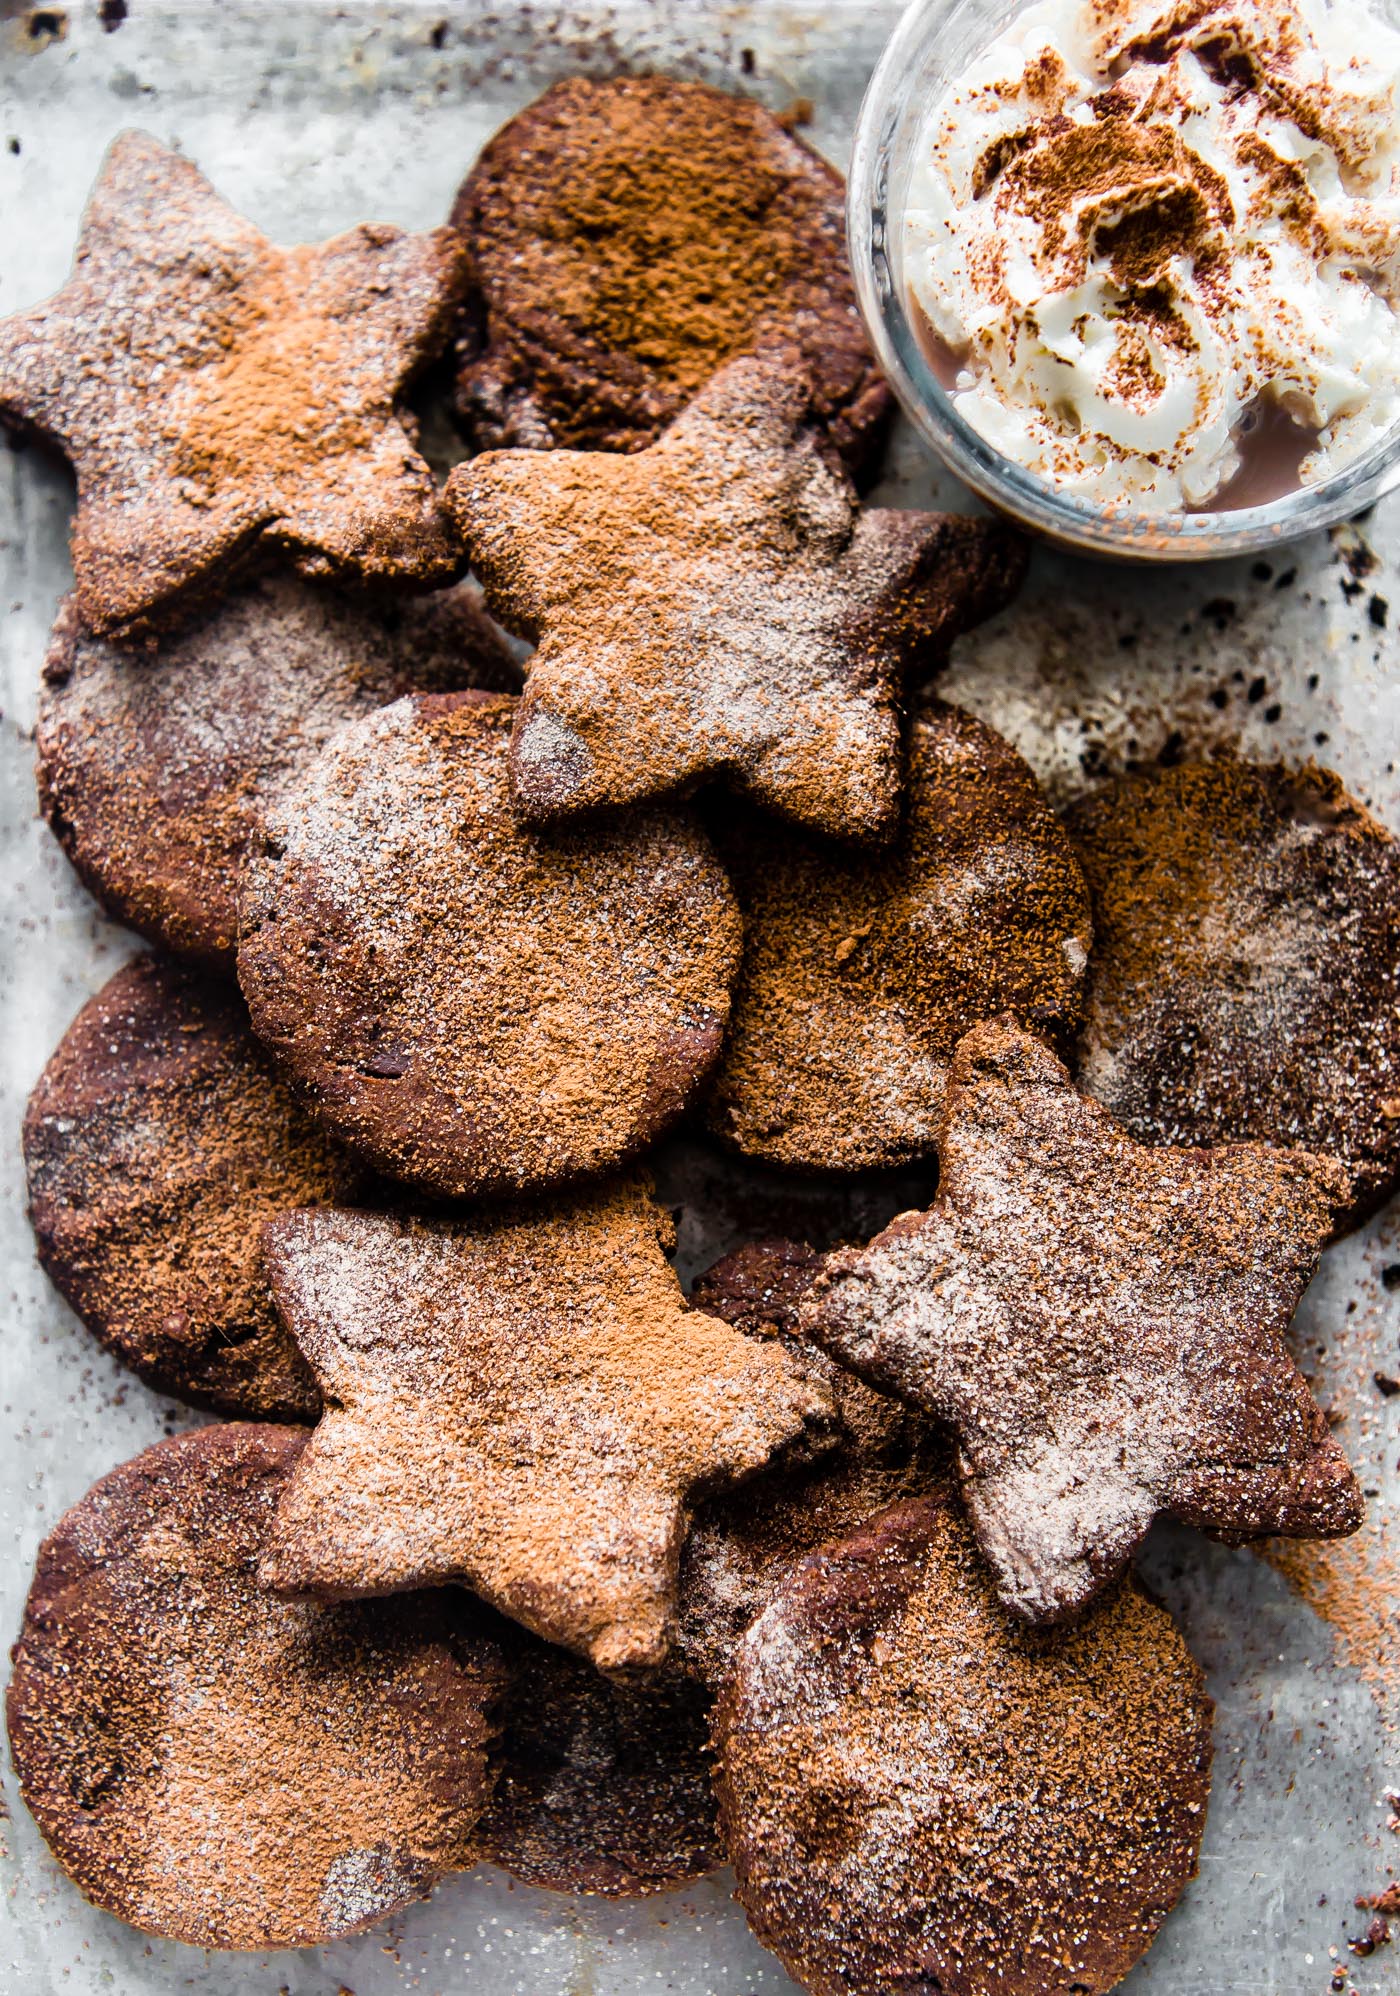 Paleo Christmas Cookie Recipes for a healthier holiday dessert! #Christmas #Paleo #cookies #glutenfree